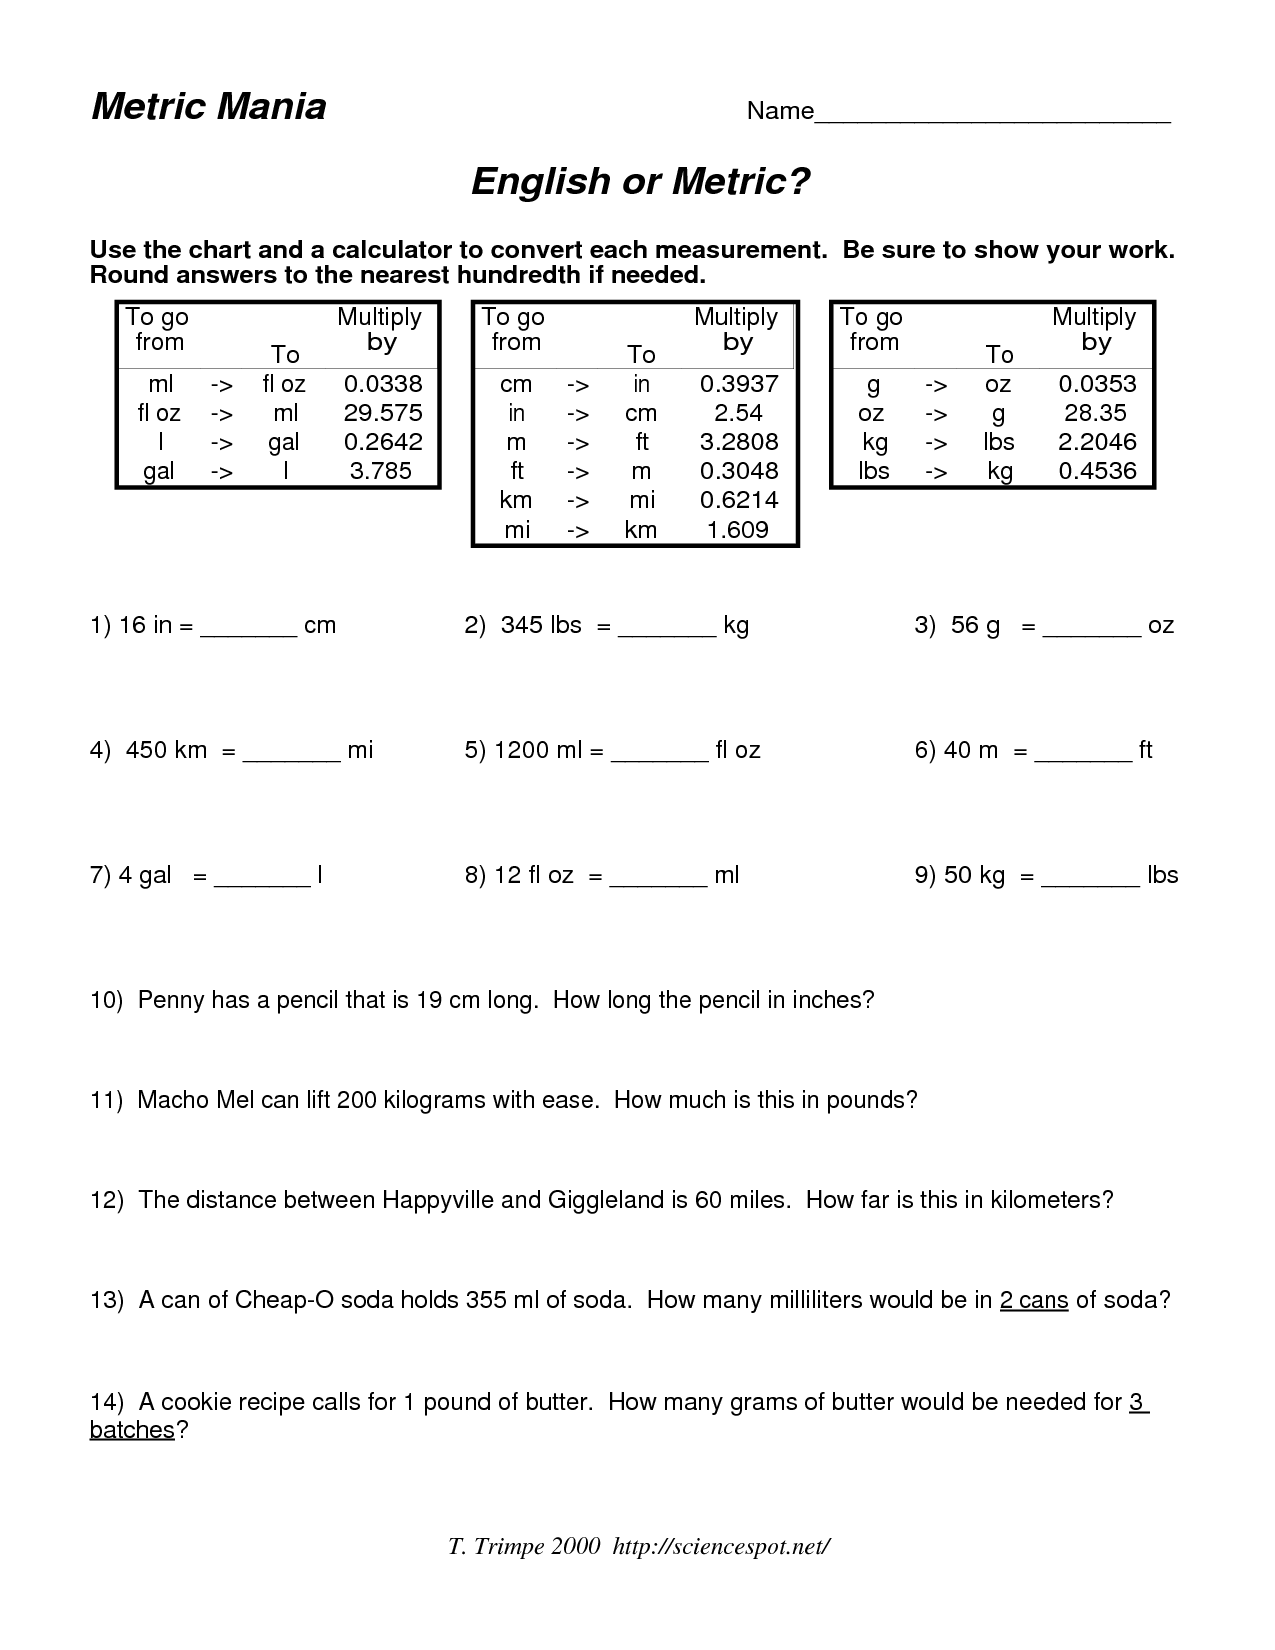 converting-english-and-metric-worksheet-answers